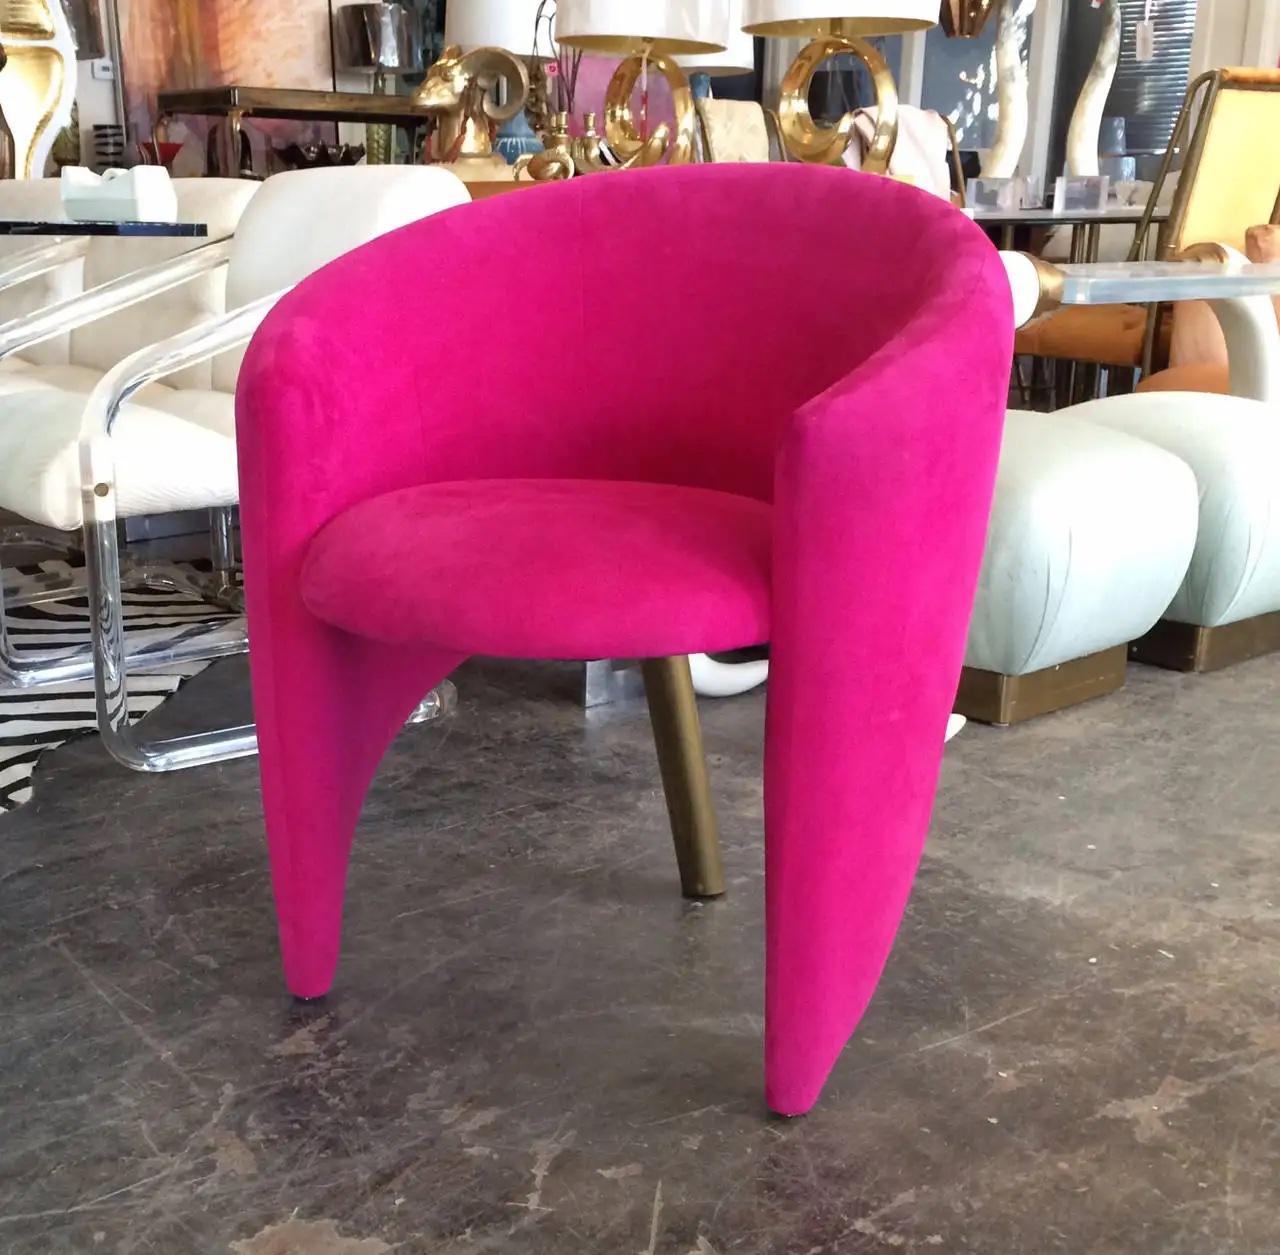 Pair of sculptural 3 legged chairs in the style of Kelly Wearstler. Available in your choice of fabric; 4 yards COM required. 8-9 week estimated production time.

Dimensions: 27